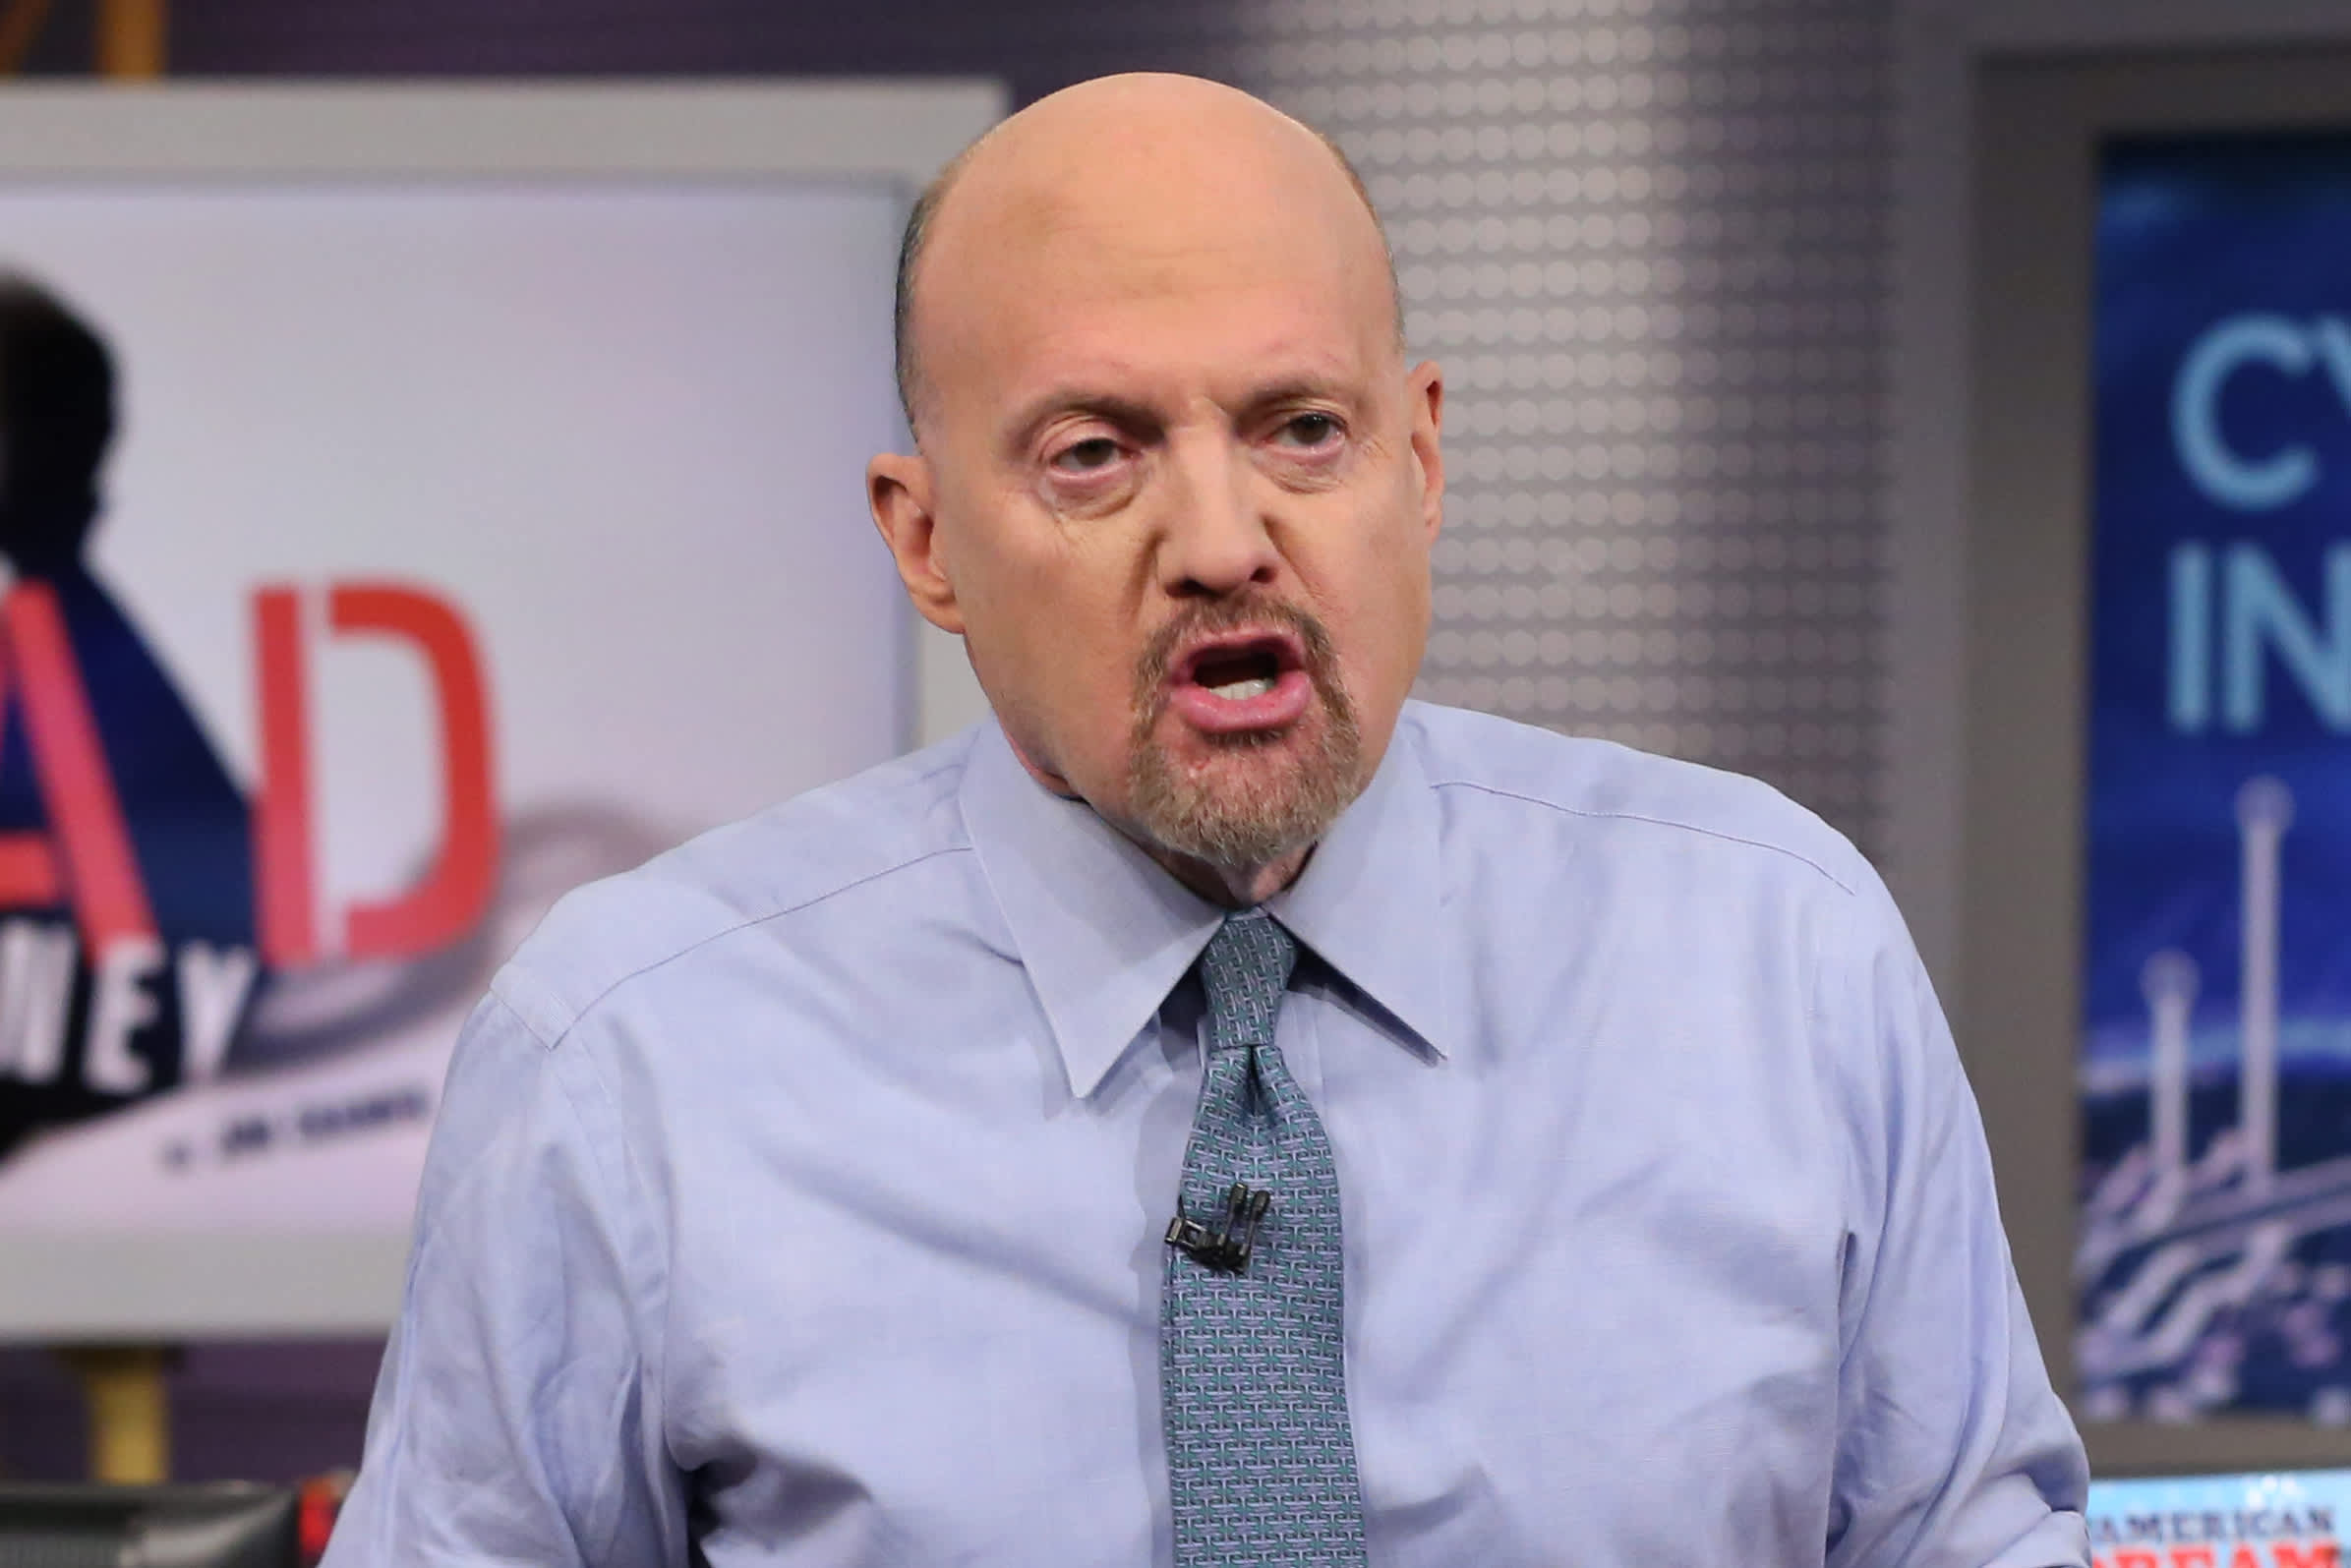 Cramer gives his take on Disney’s rally and shares pitfalls to avoid in big market moves